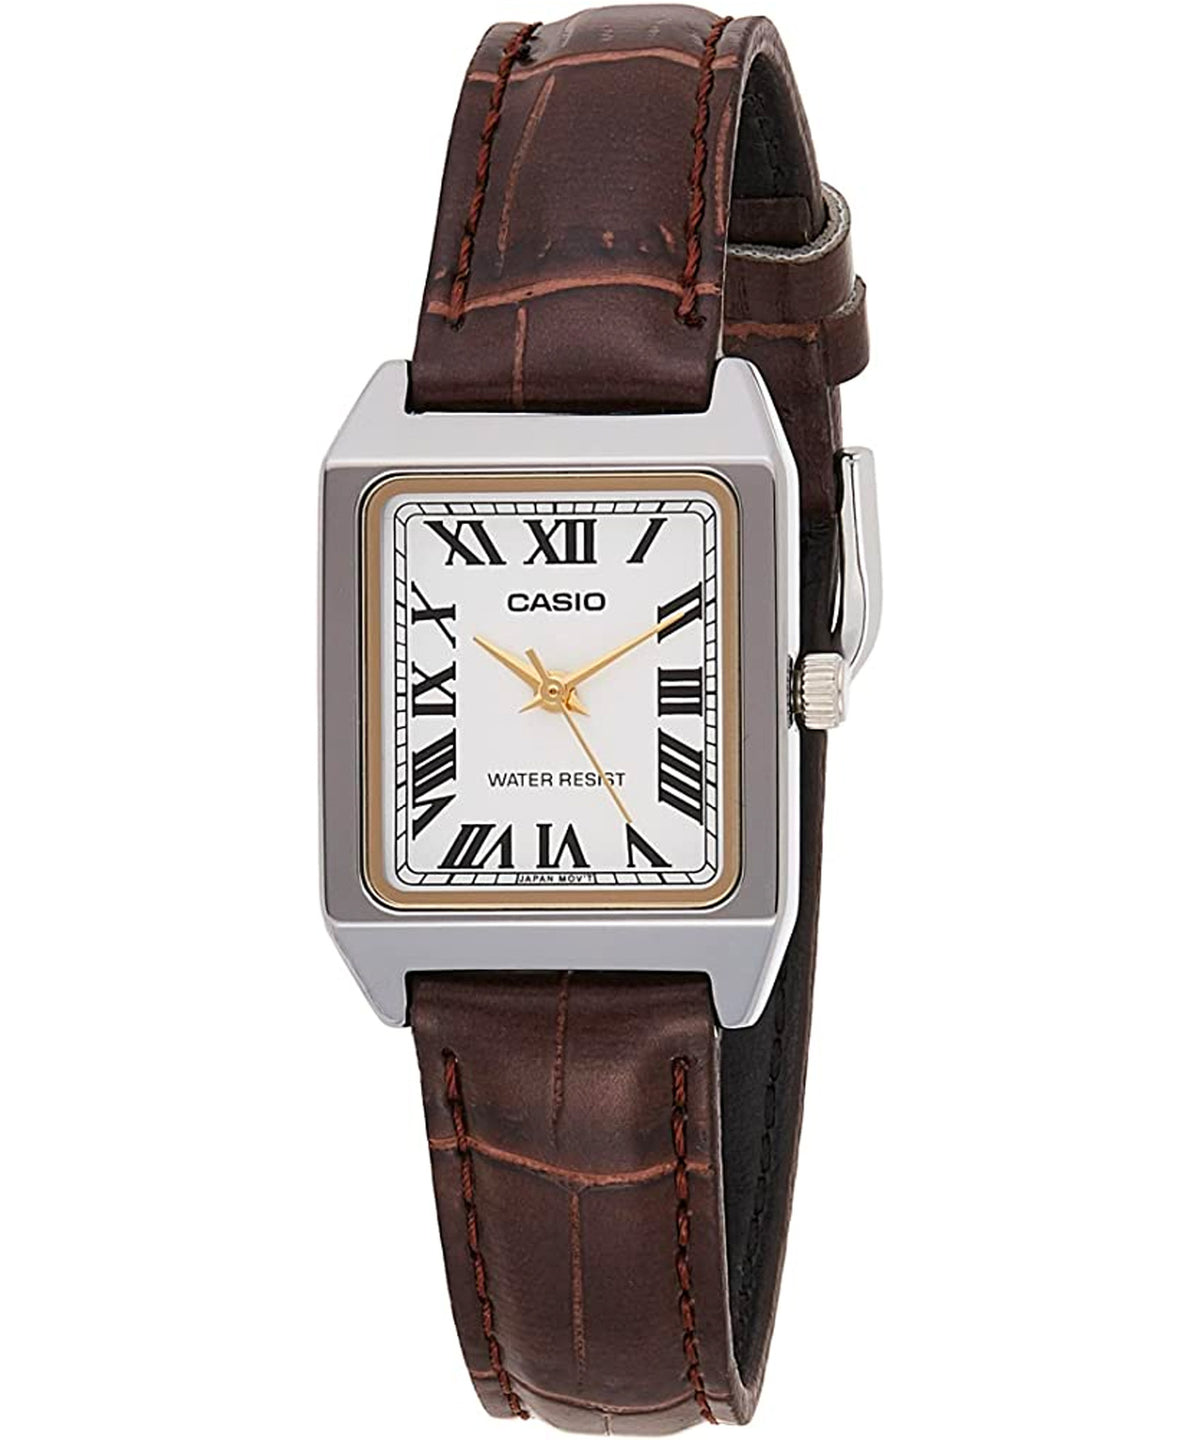 Casio Women's Watch Analog, White Dial Brown Leather Strap, LTP-V007L-7B2UDF